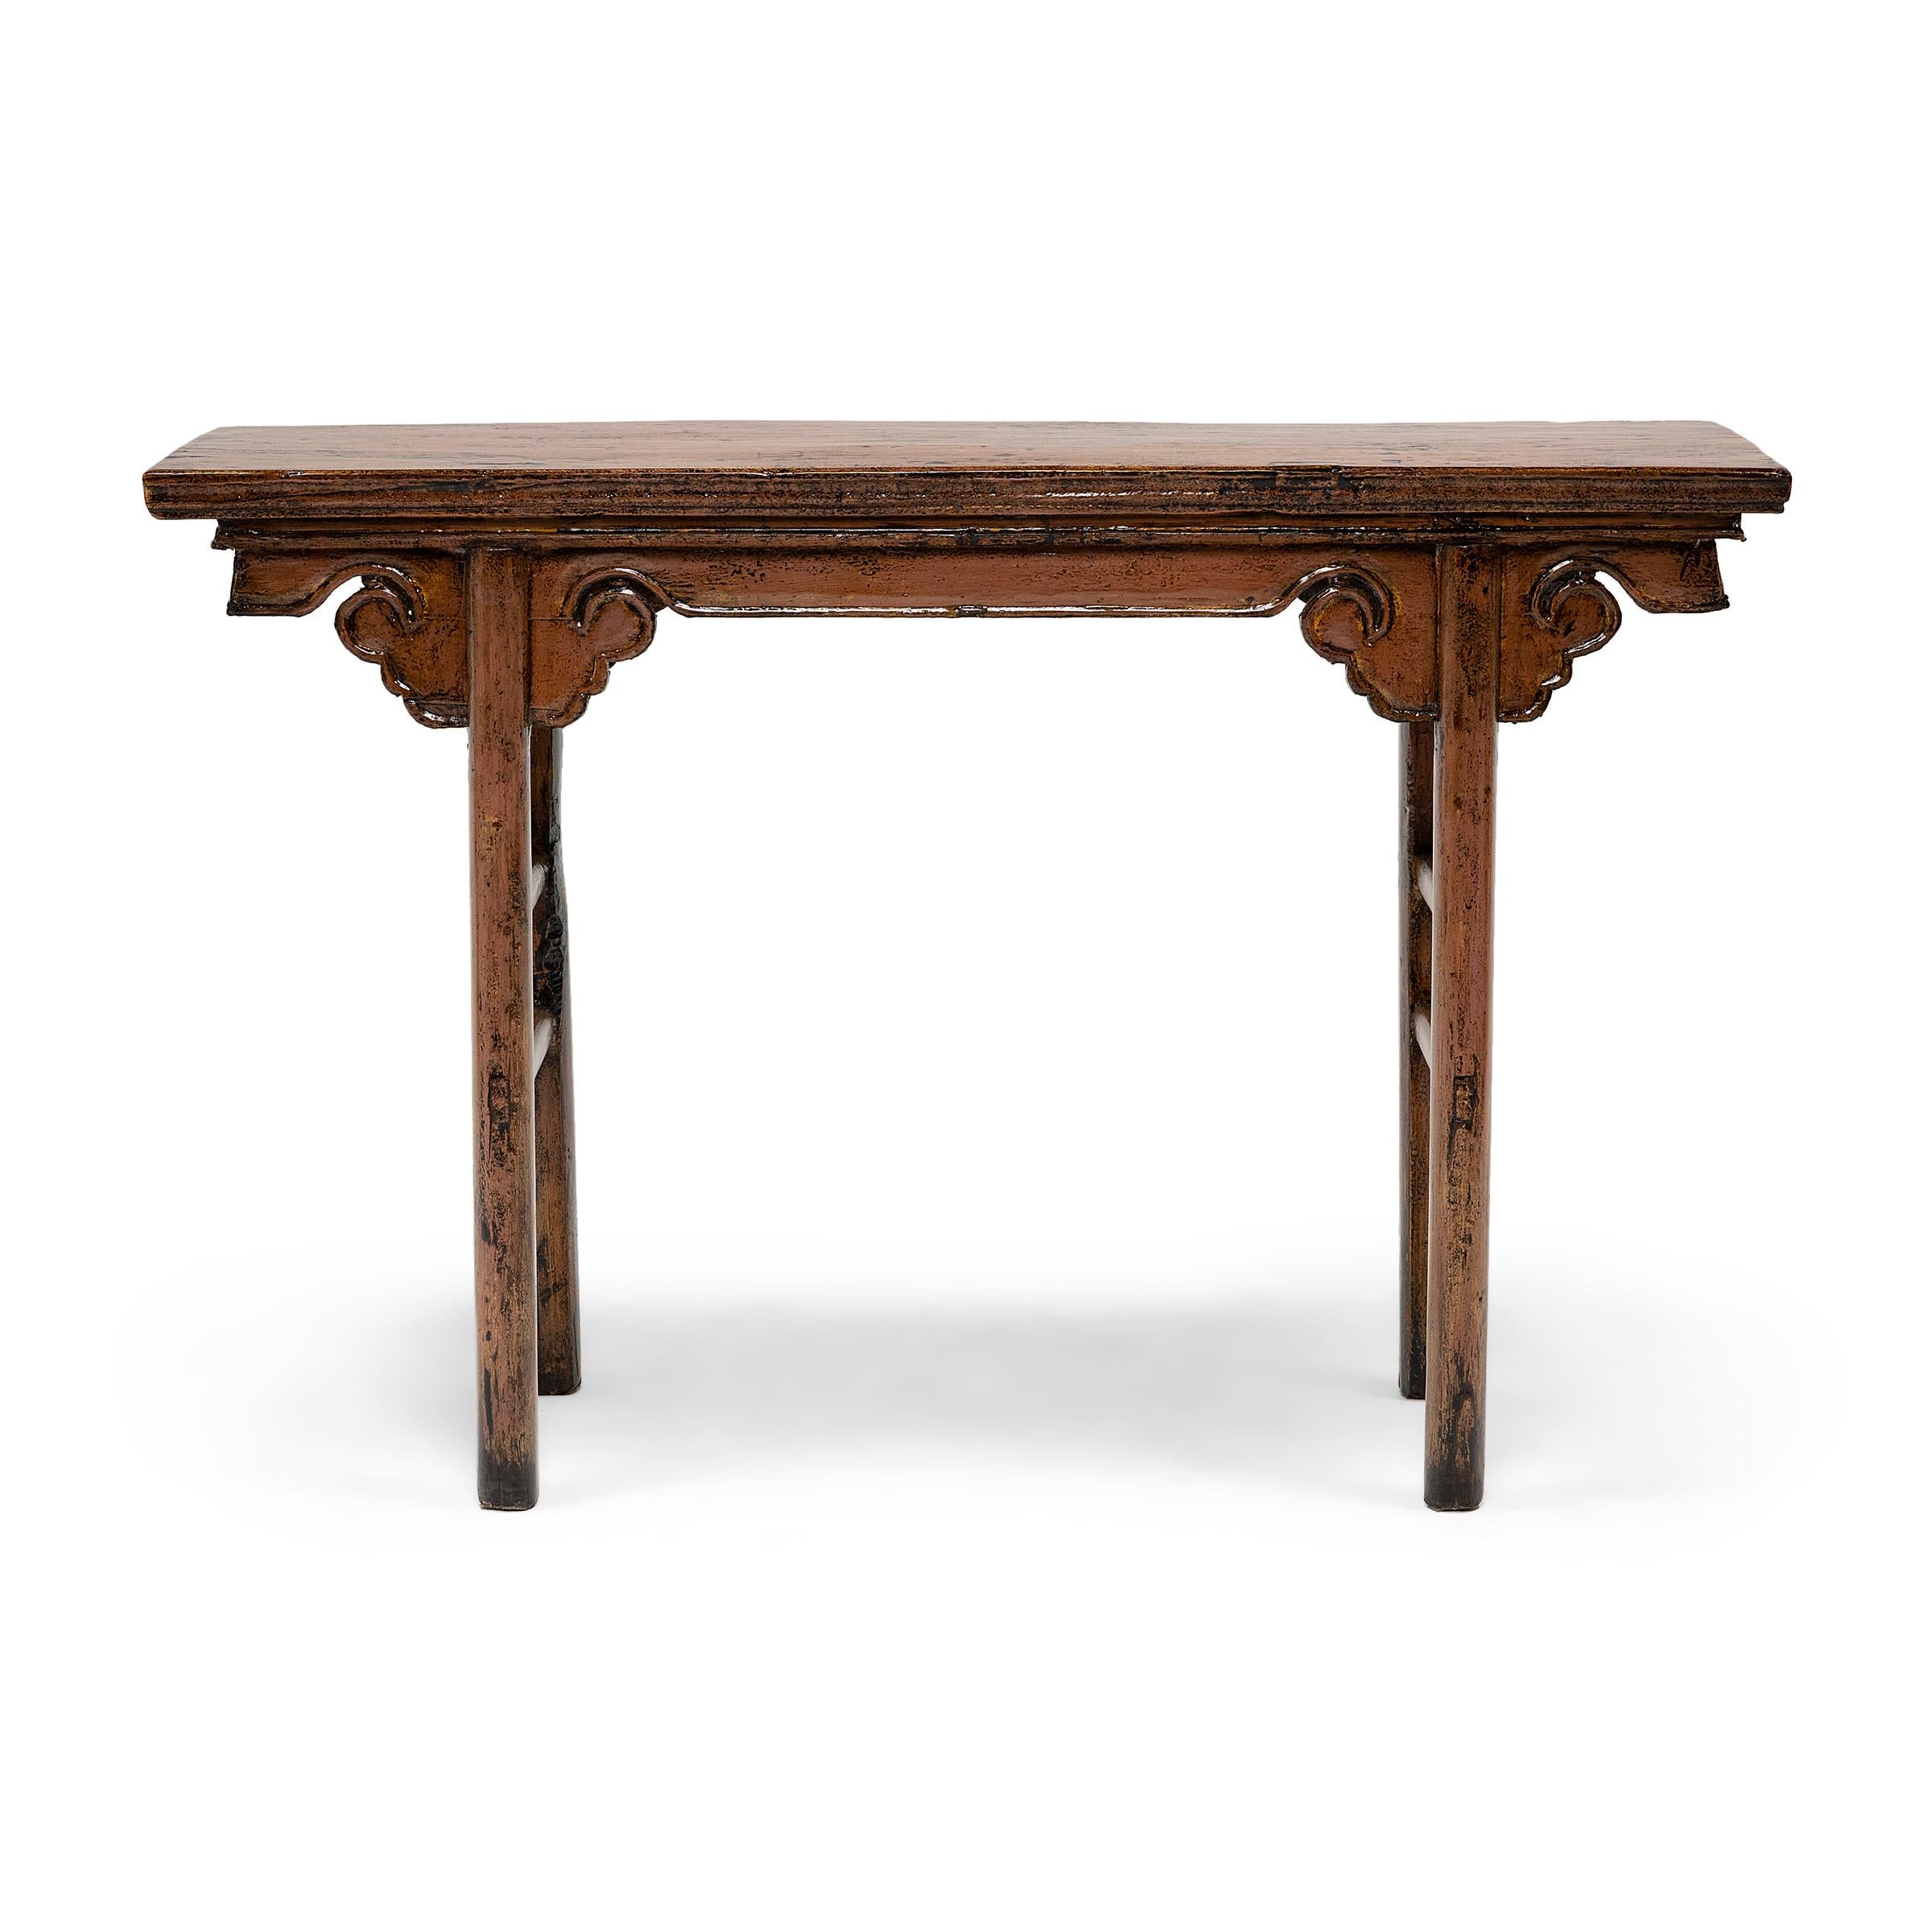 This late 19th-century Chinese altar table expresses Ming-dynasty tastes with clean lines and a simple silhouette. Minimally decorated, the table is constructed with straight legs and double stretchers. The legs meet at beautifully stylized